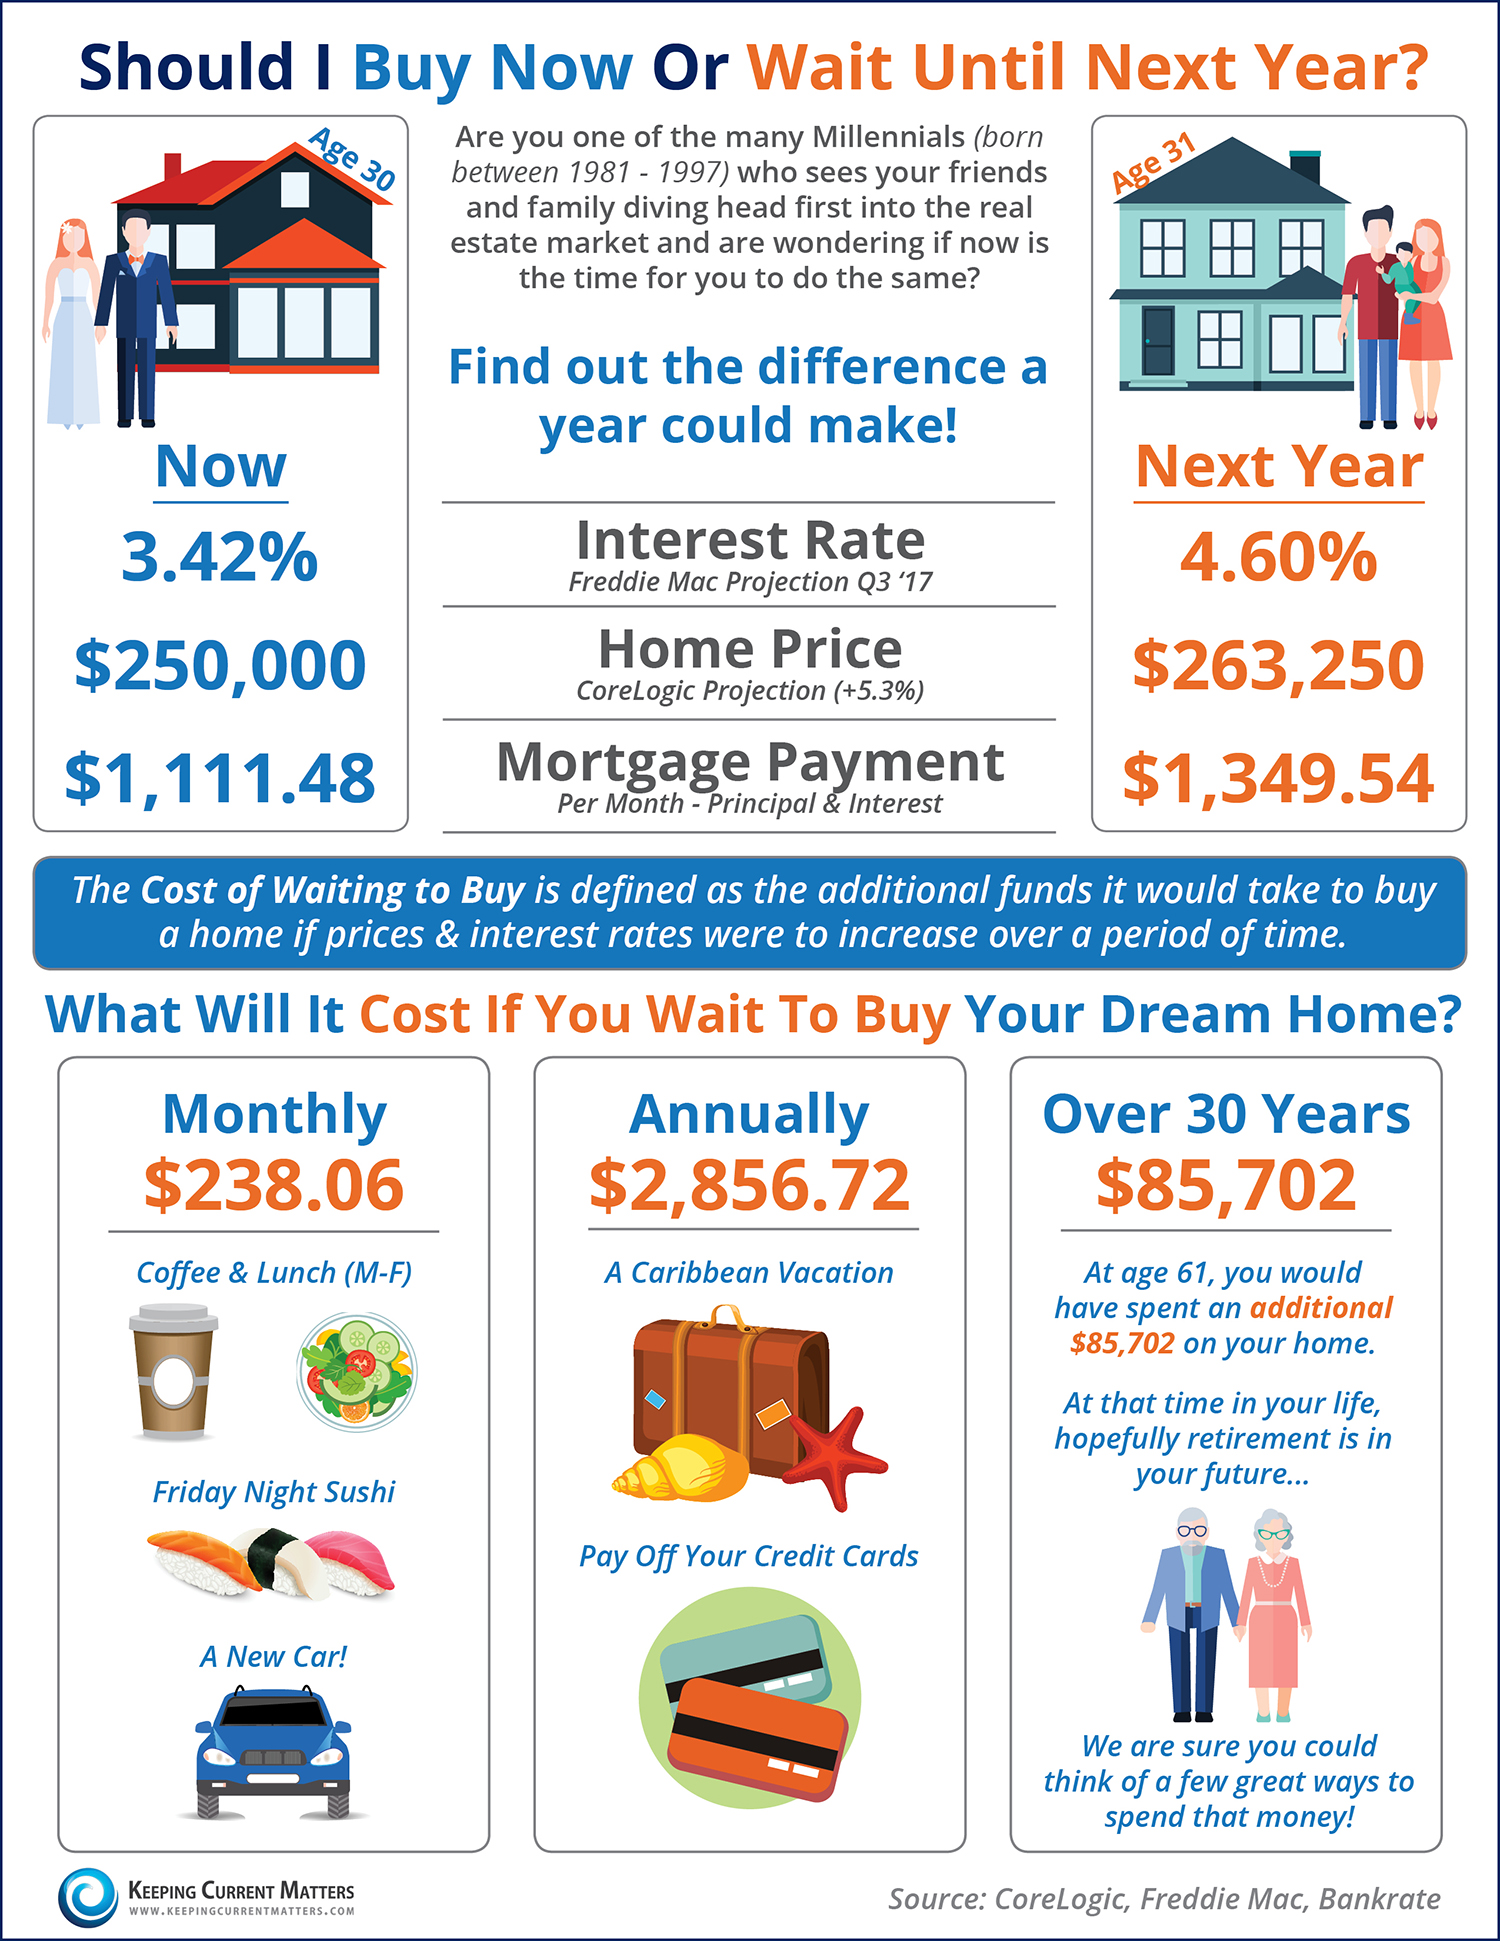 Should I Wait Until Next Year? Or Buy Now? [INFOGRAPHIC] | Keeping Current Matters